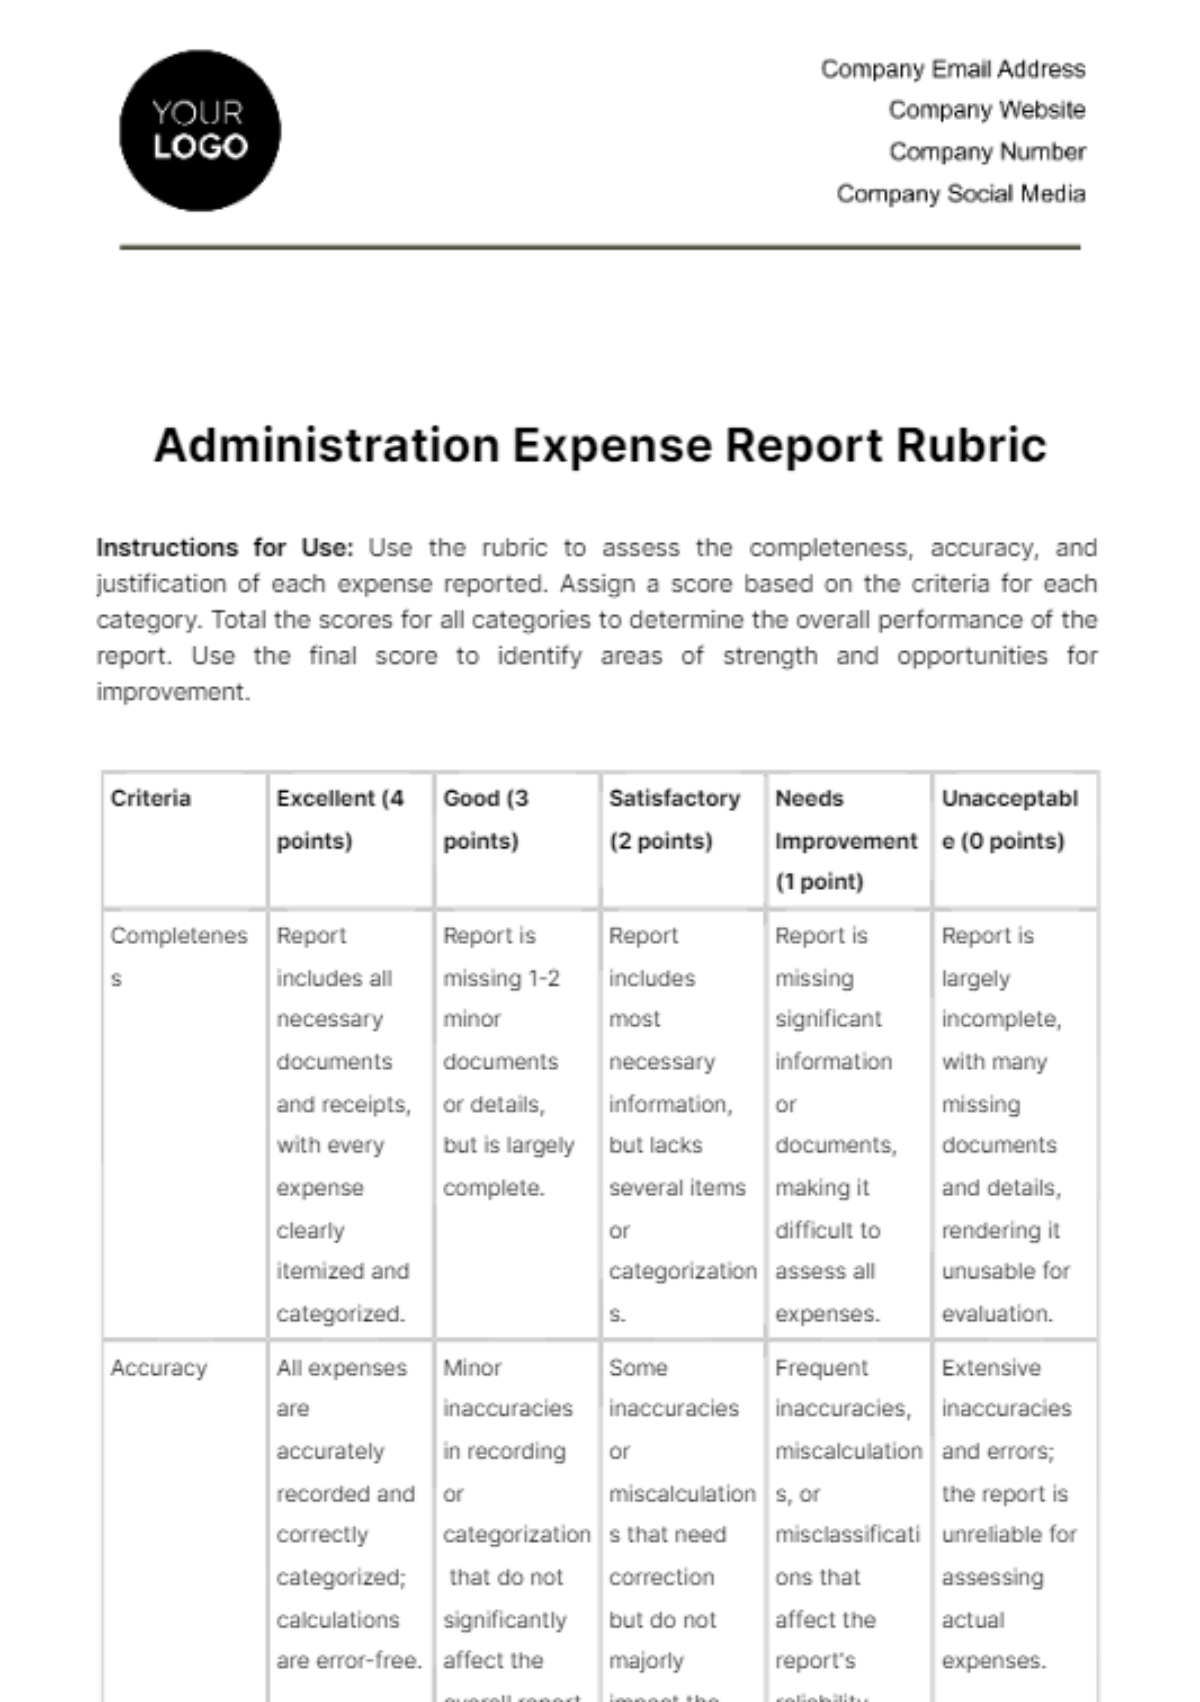 Administration Expense Report Rubric Template